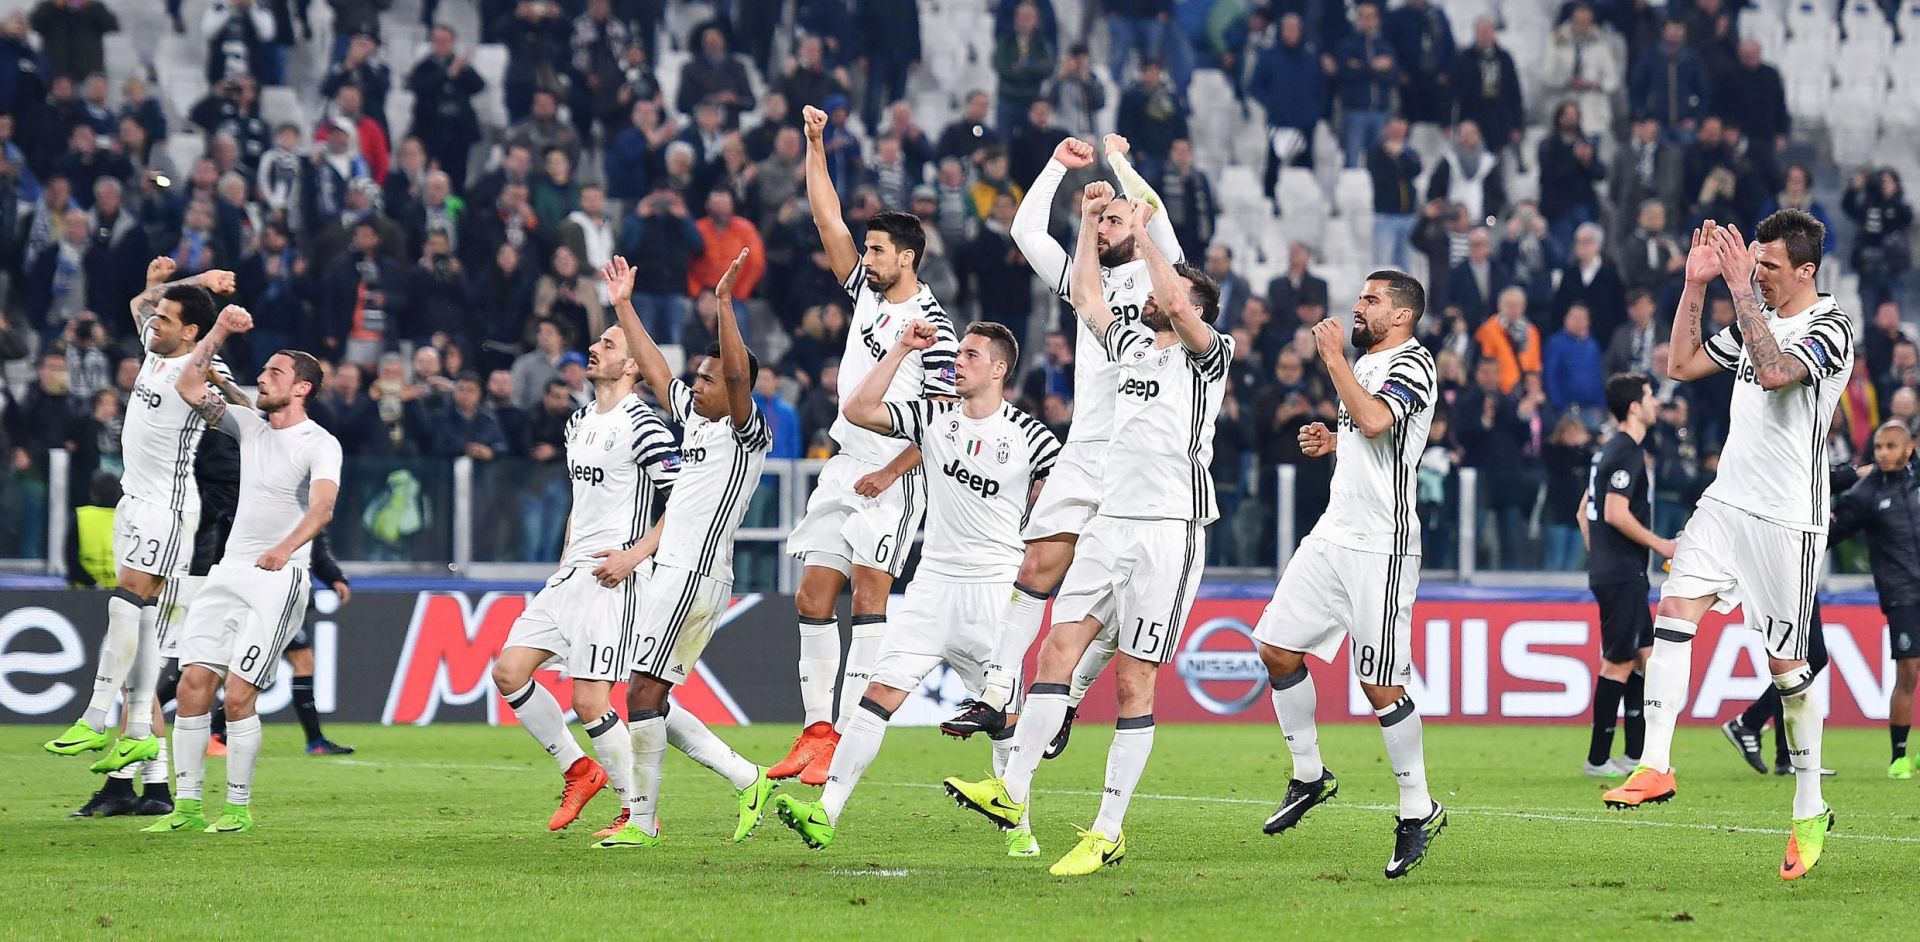 epa05848691 Juventus' players celebrate the victory at the end of the UEFA Champions League round of 16, second leg, soccer match Juventus FC vs FC Porto at Juventus Stadium in Turin, Italy, 14 March 2017.  EPA/ALESSANDRO DI MARCO